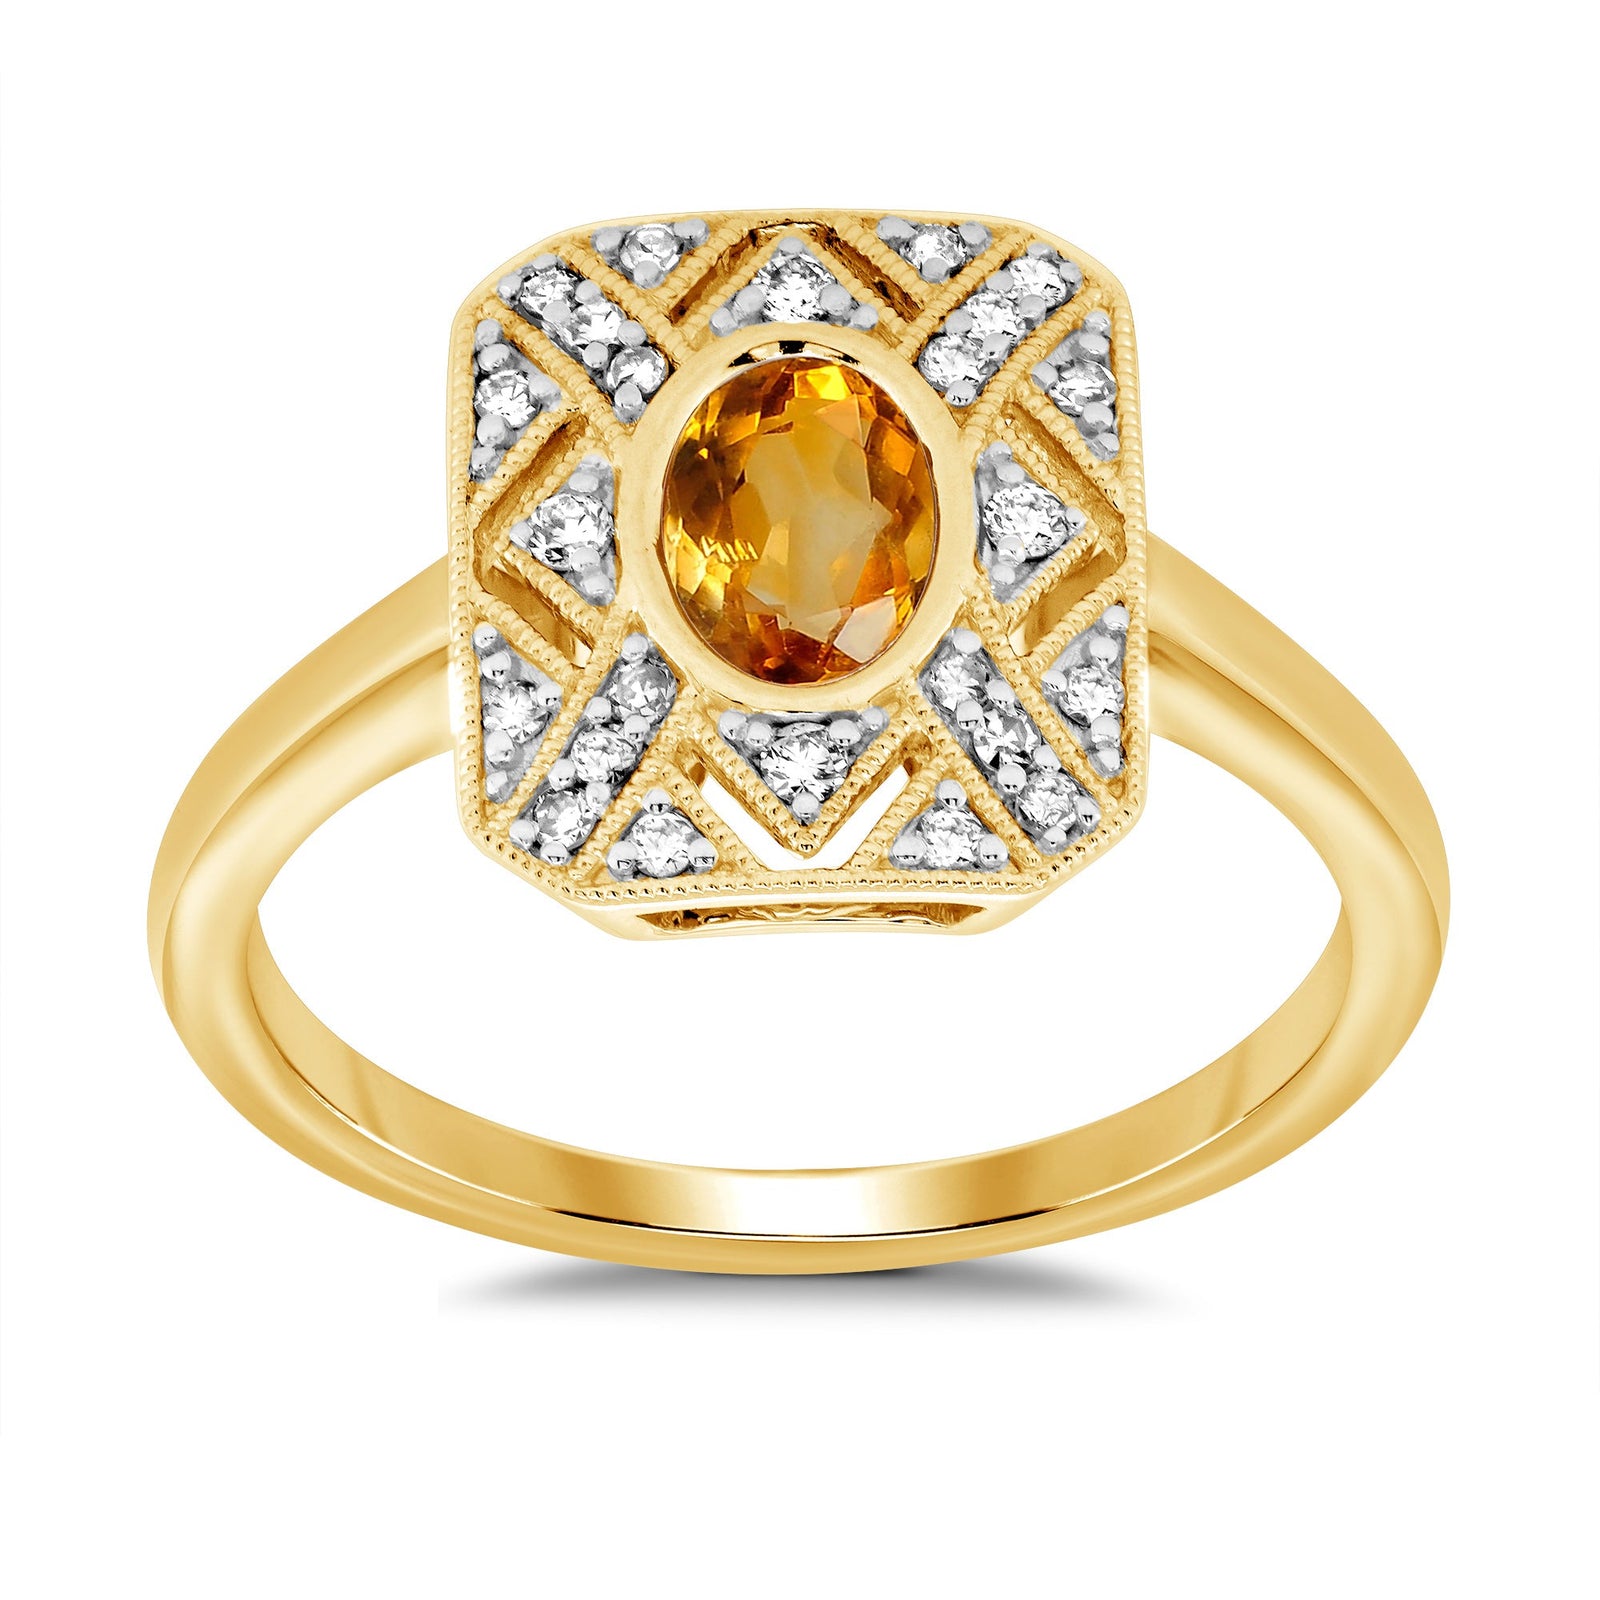 9ct gold 7x5mm oval citrine & antique style diamond cluster ring 0.17ct